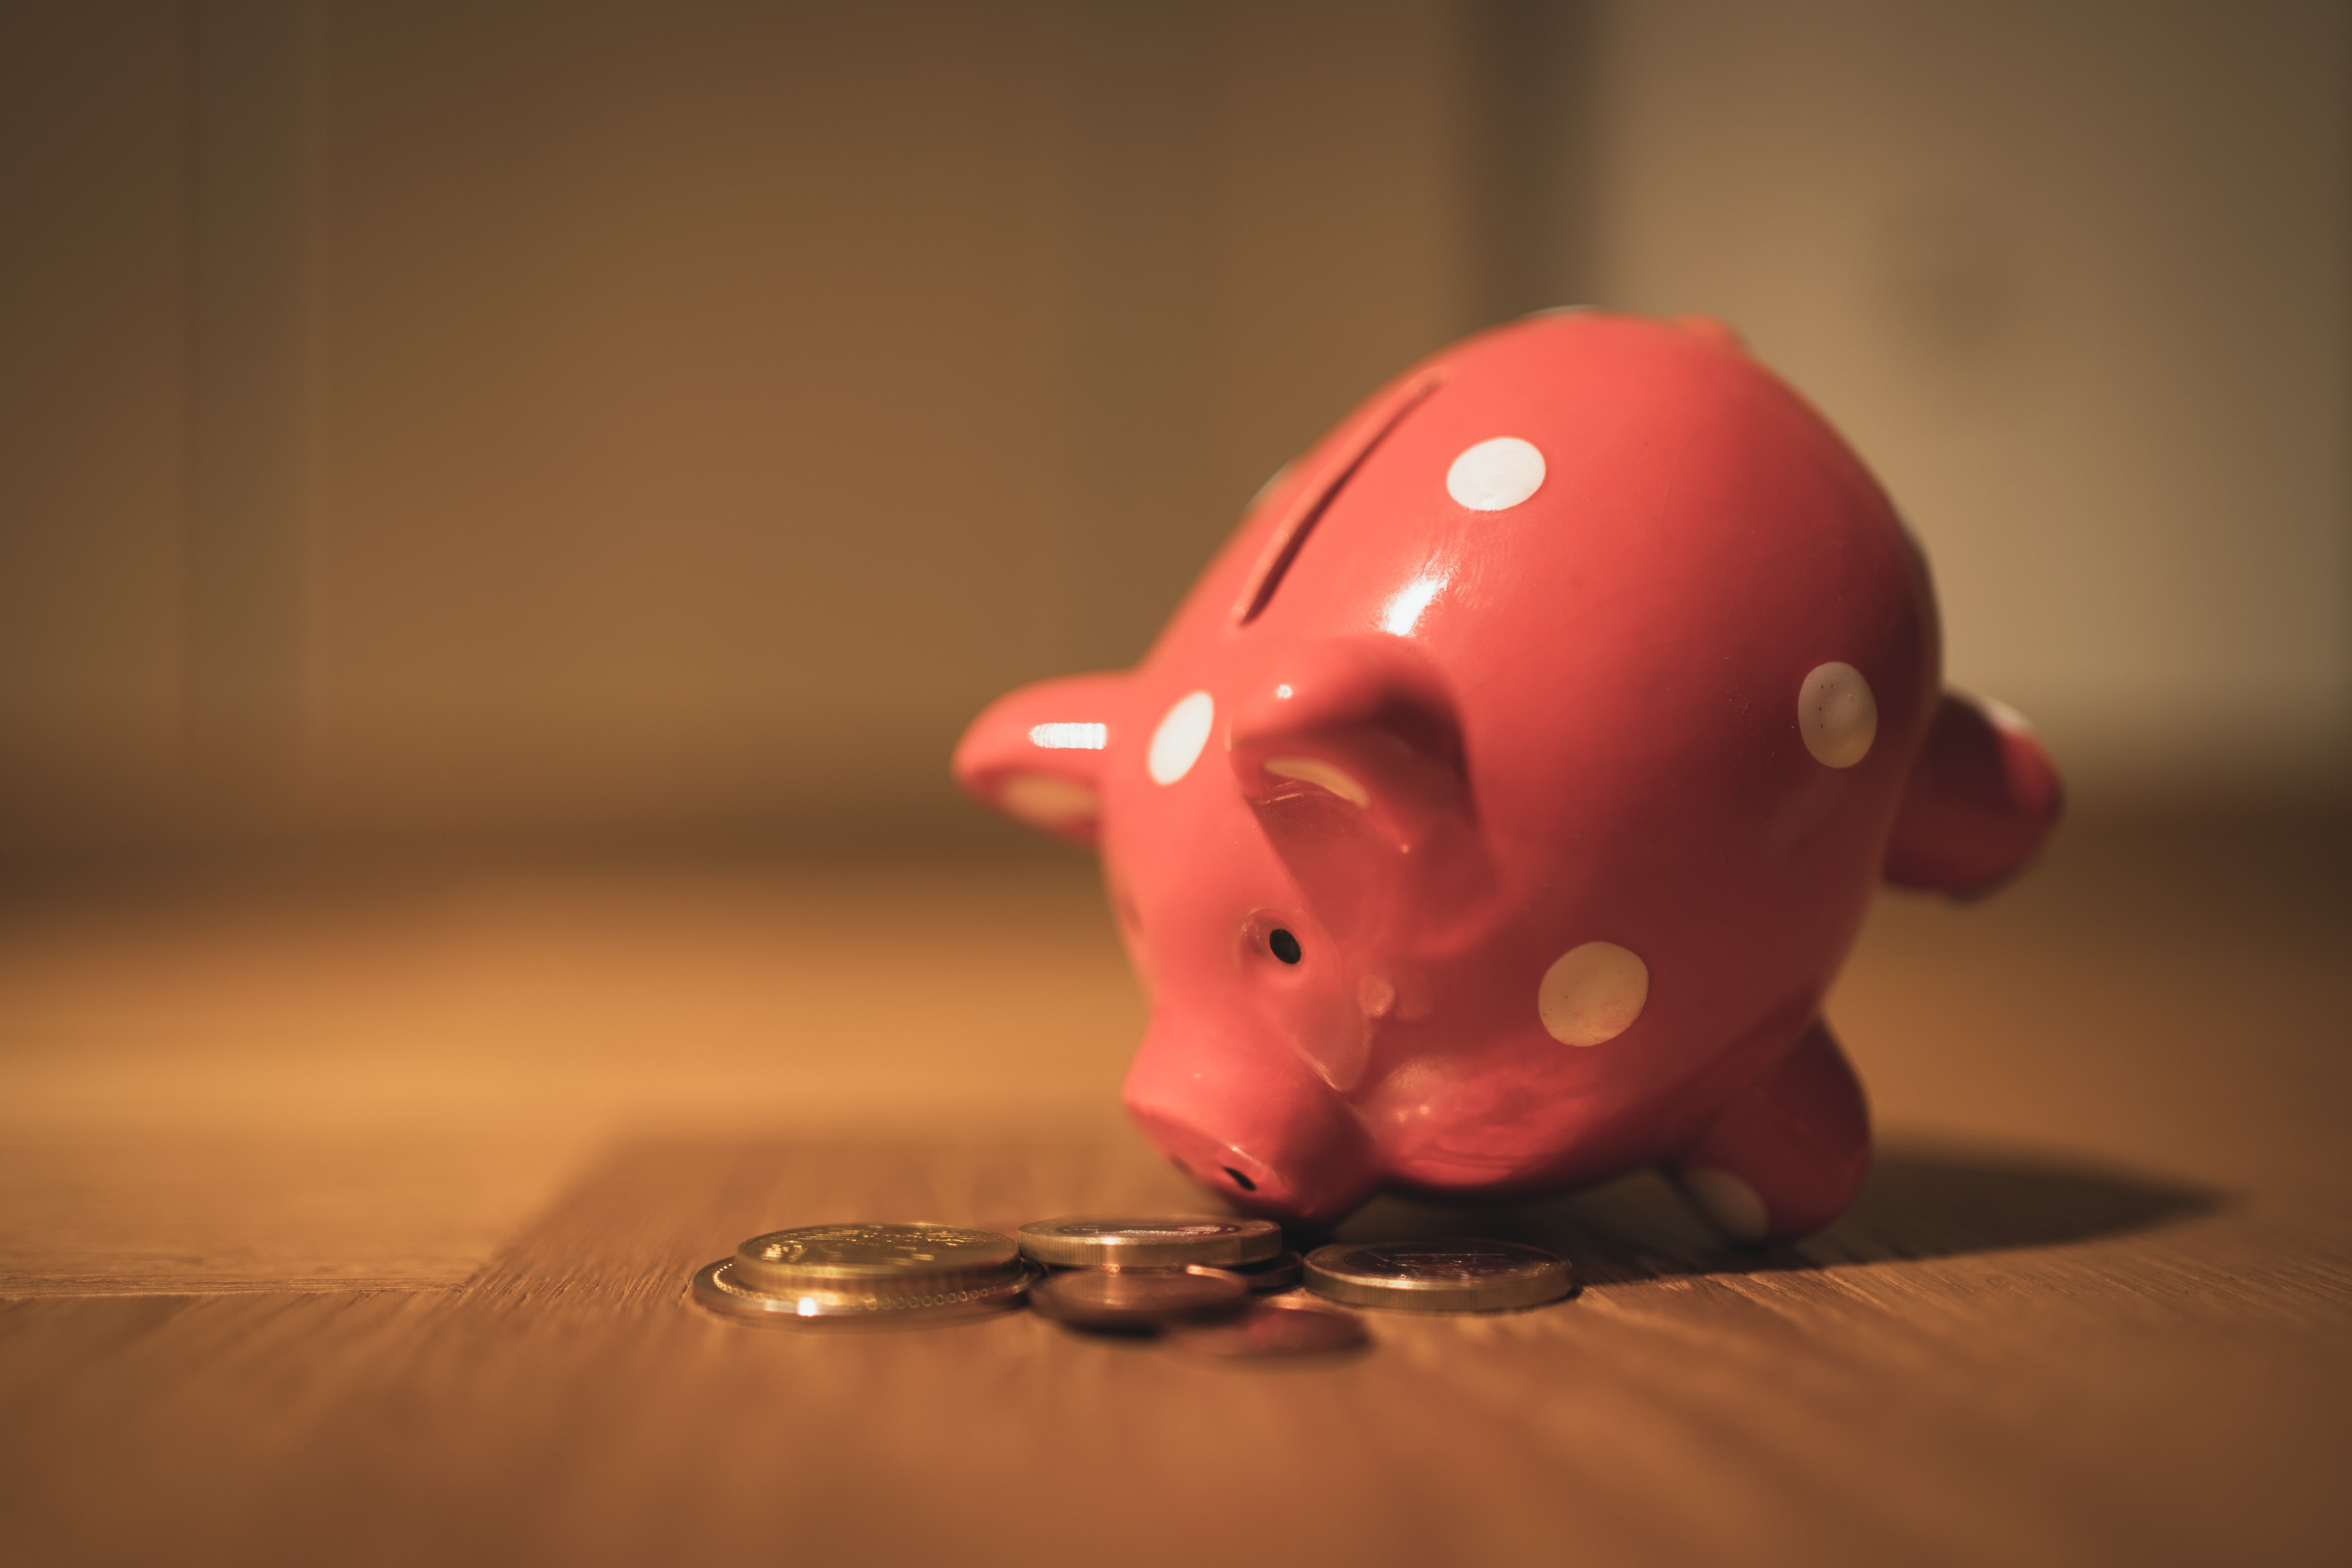 Piggy bank and coins